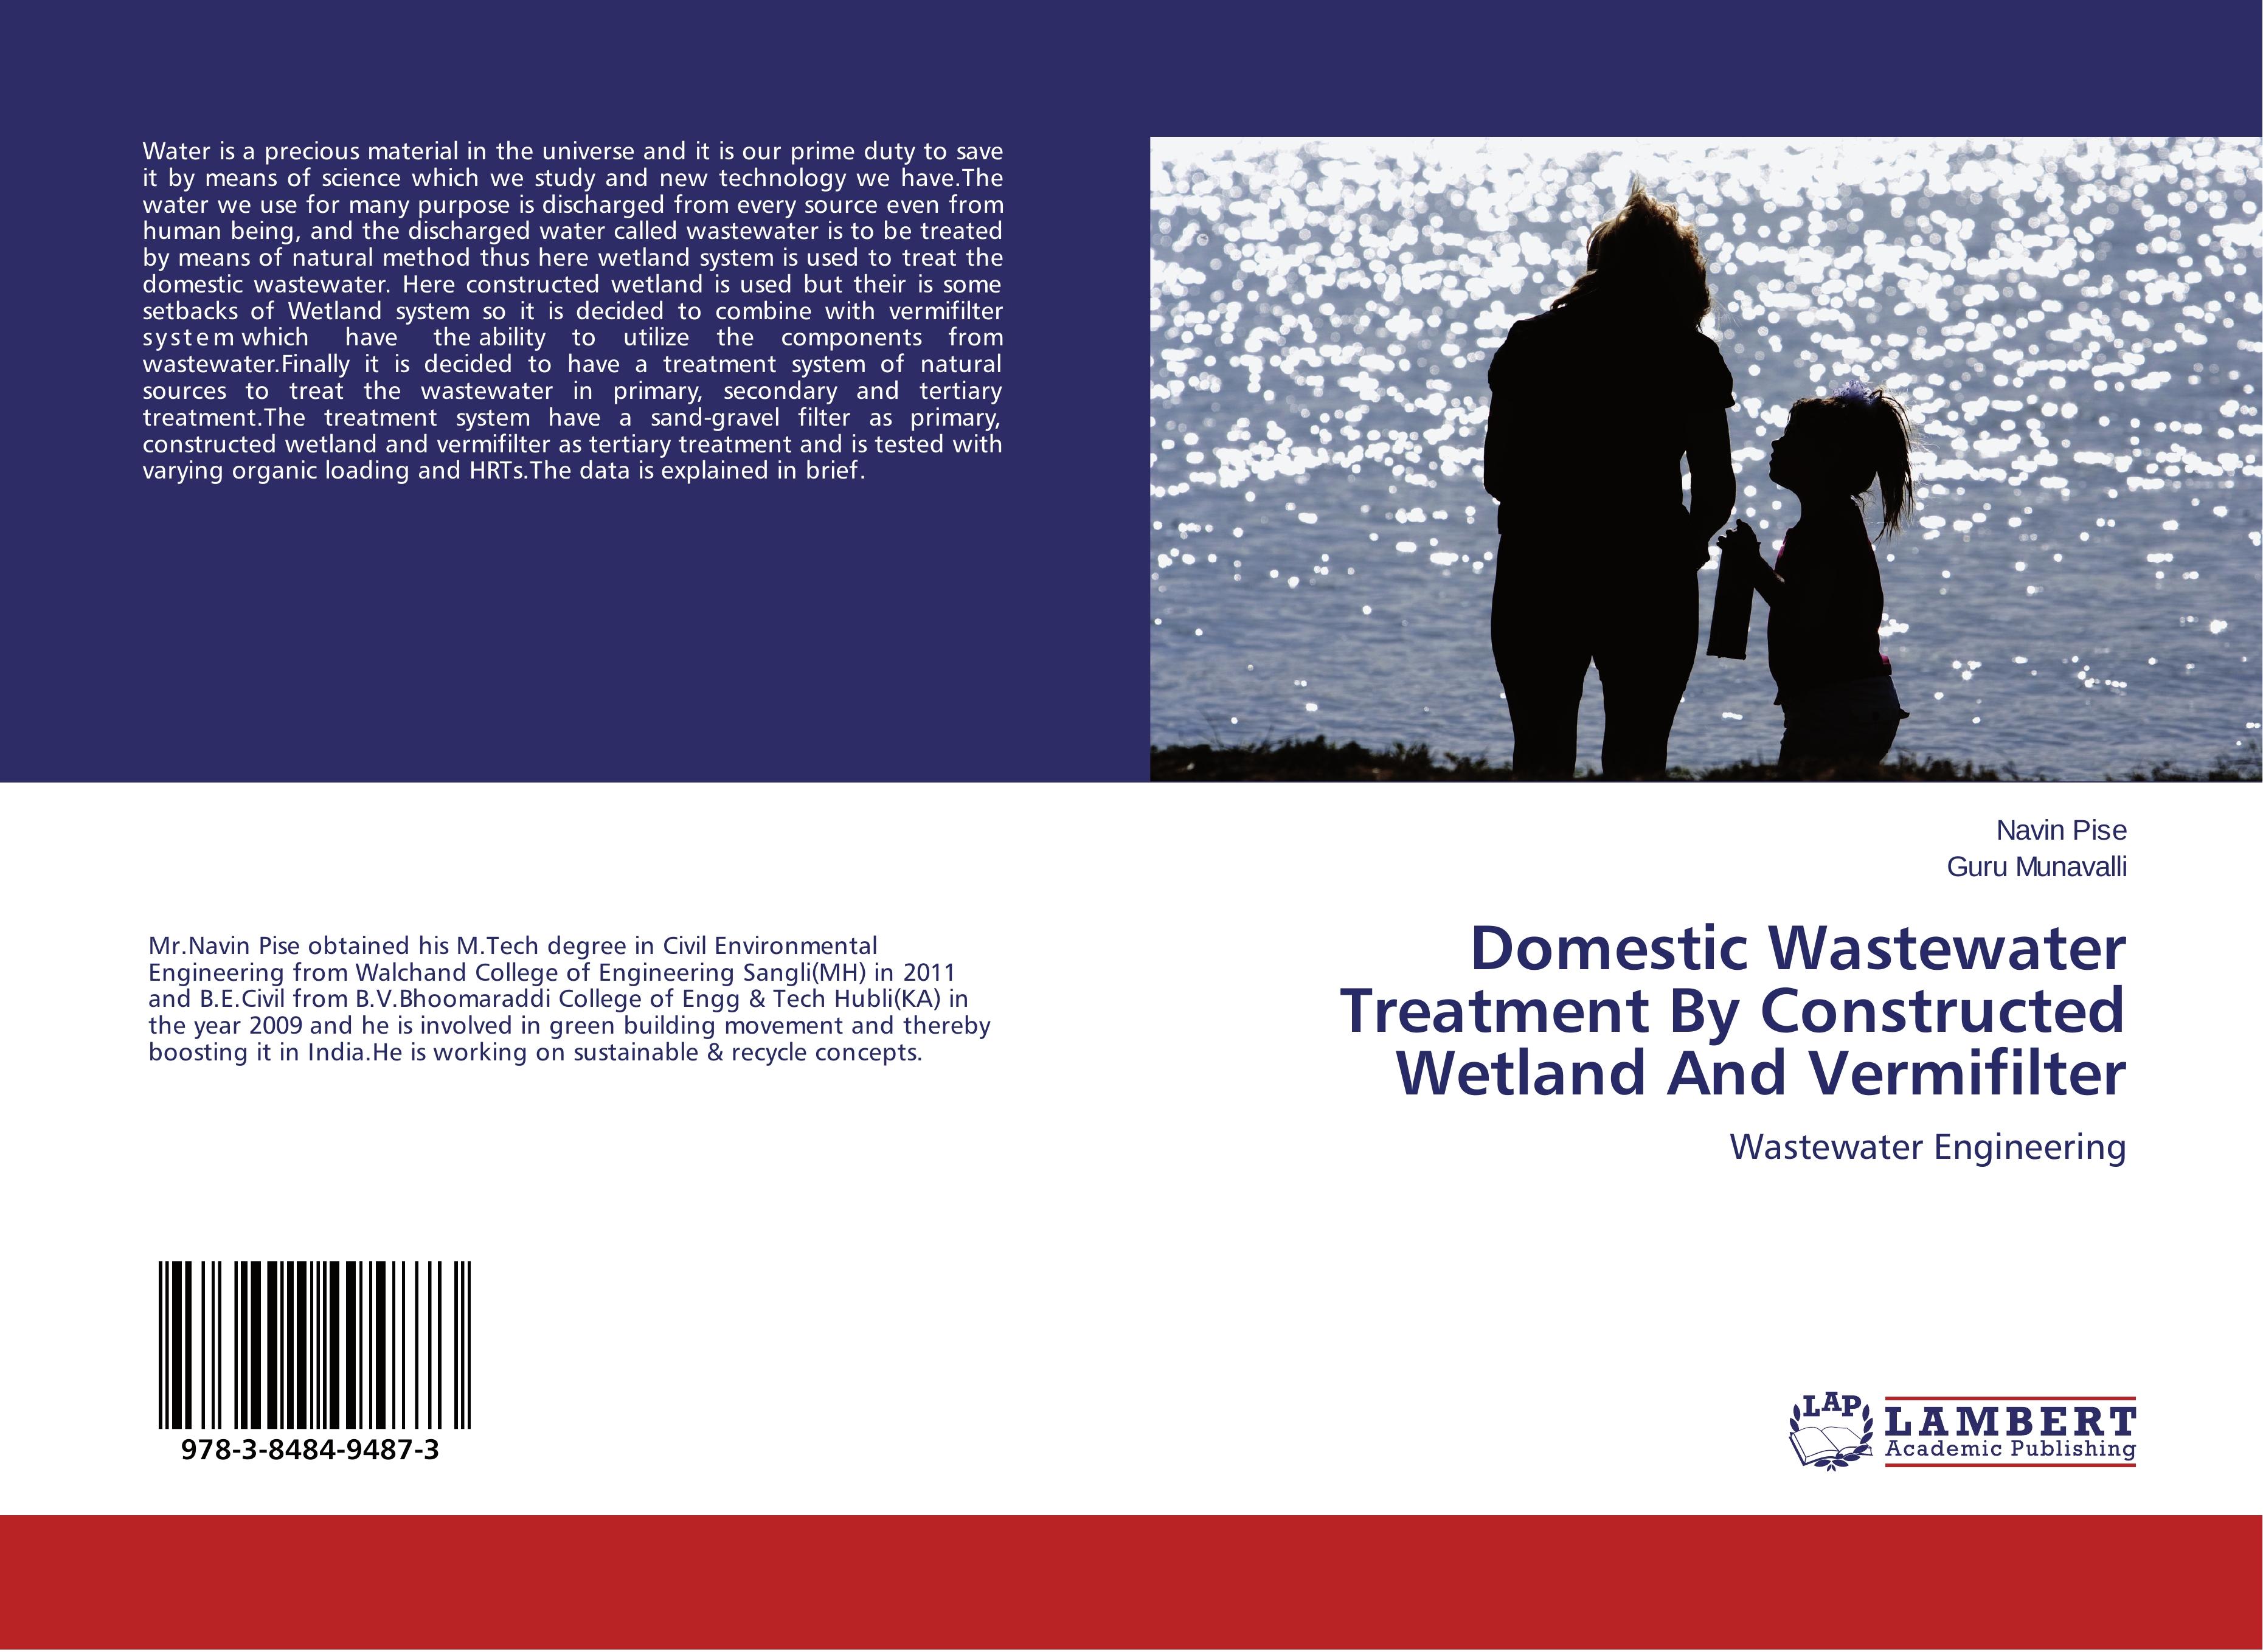 Domestic Wastewater Treatment By Constructed Wetland And Vermifilter - Navin Pise|Guru Munavalli